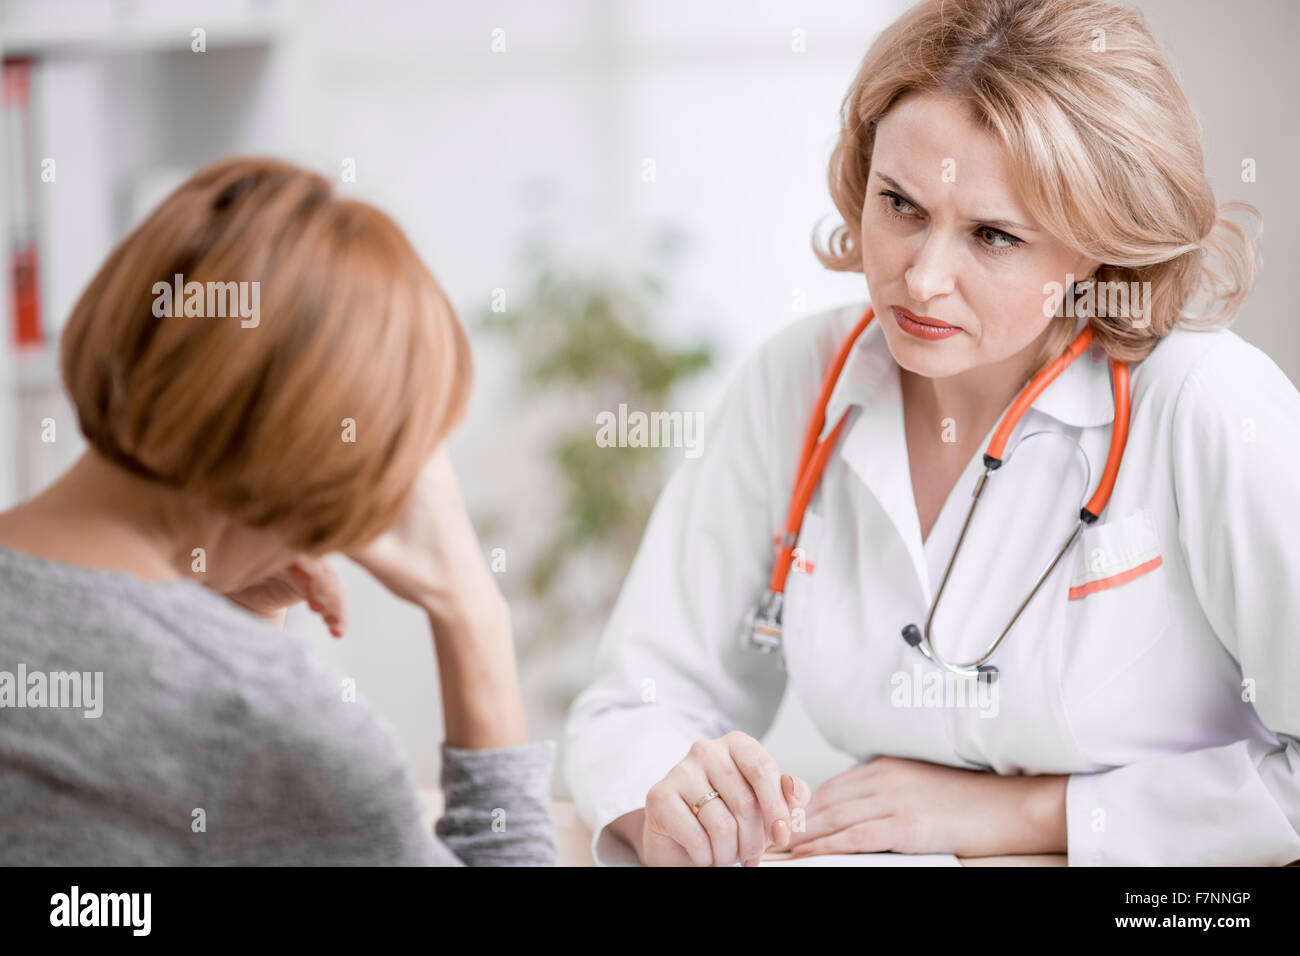 Serious doctor or physician looking at upset patient Stock Photo